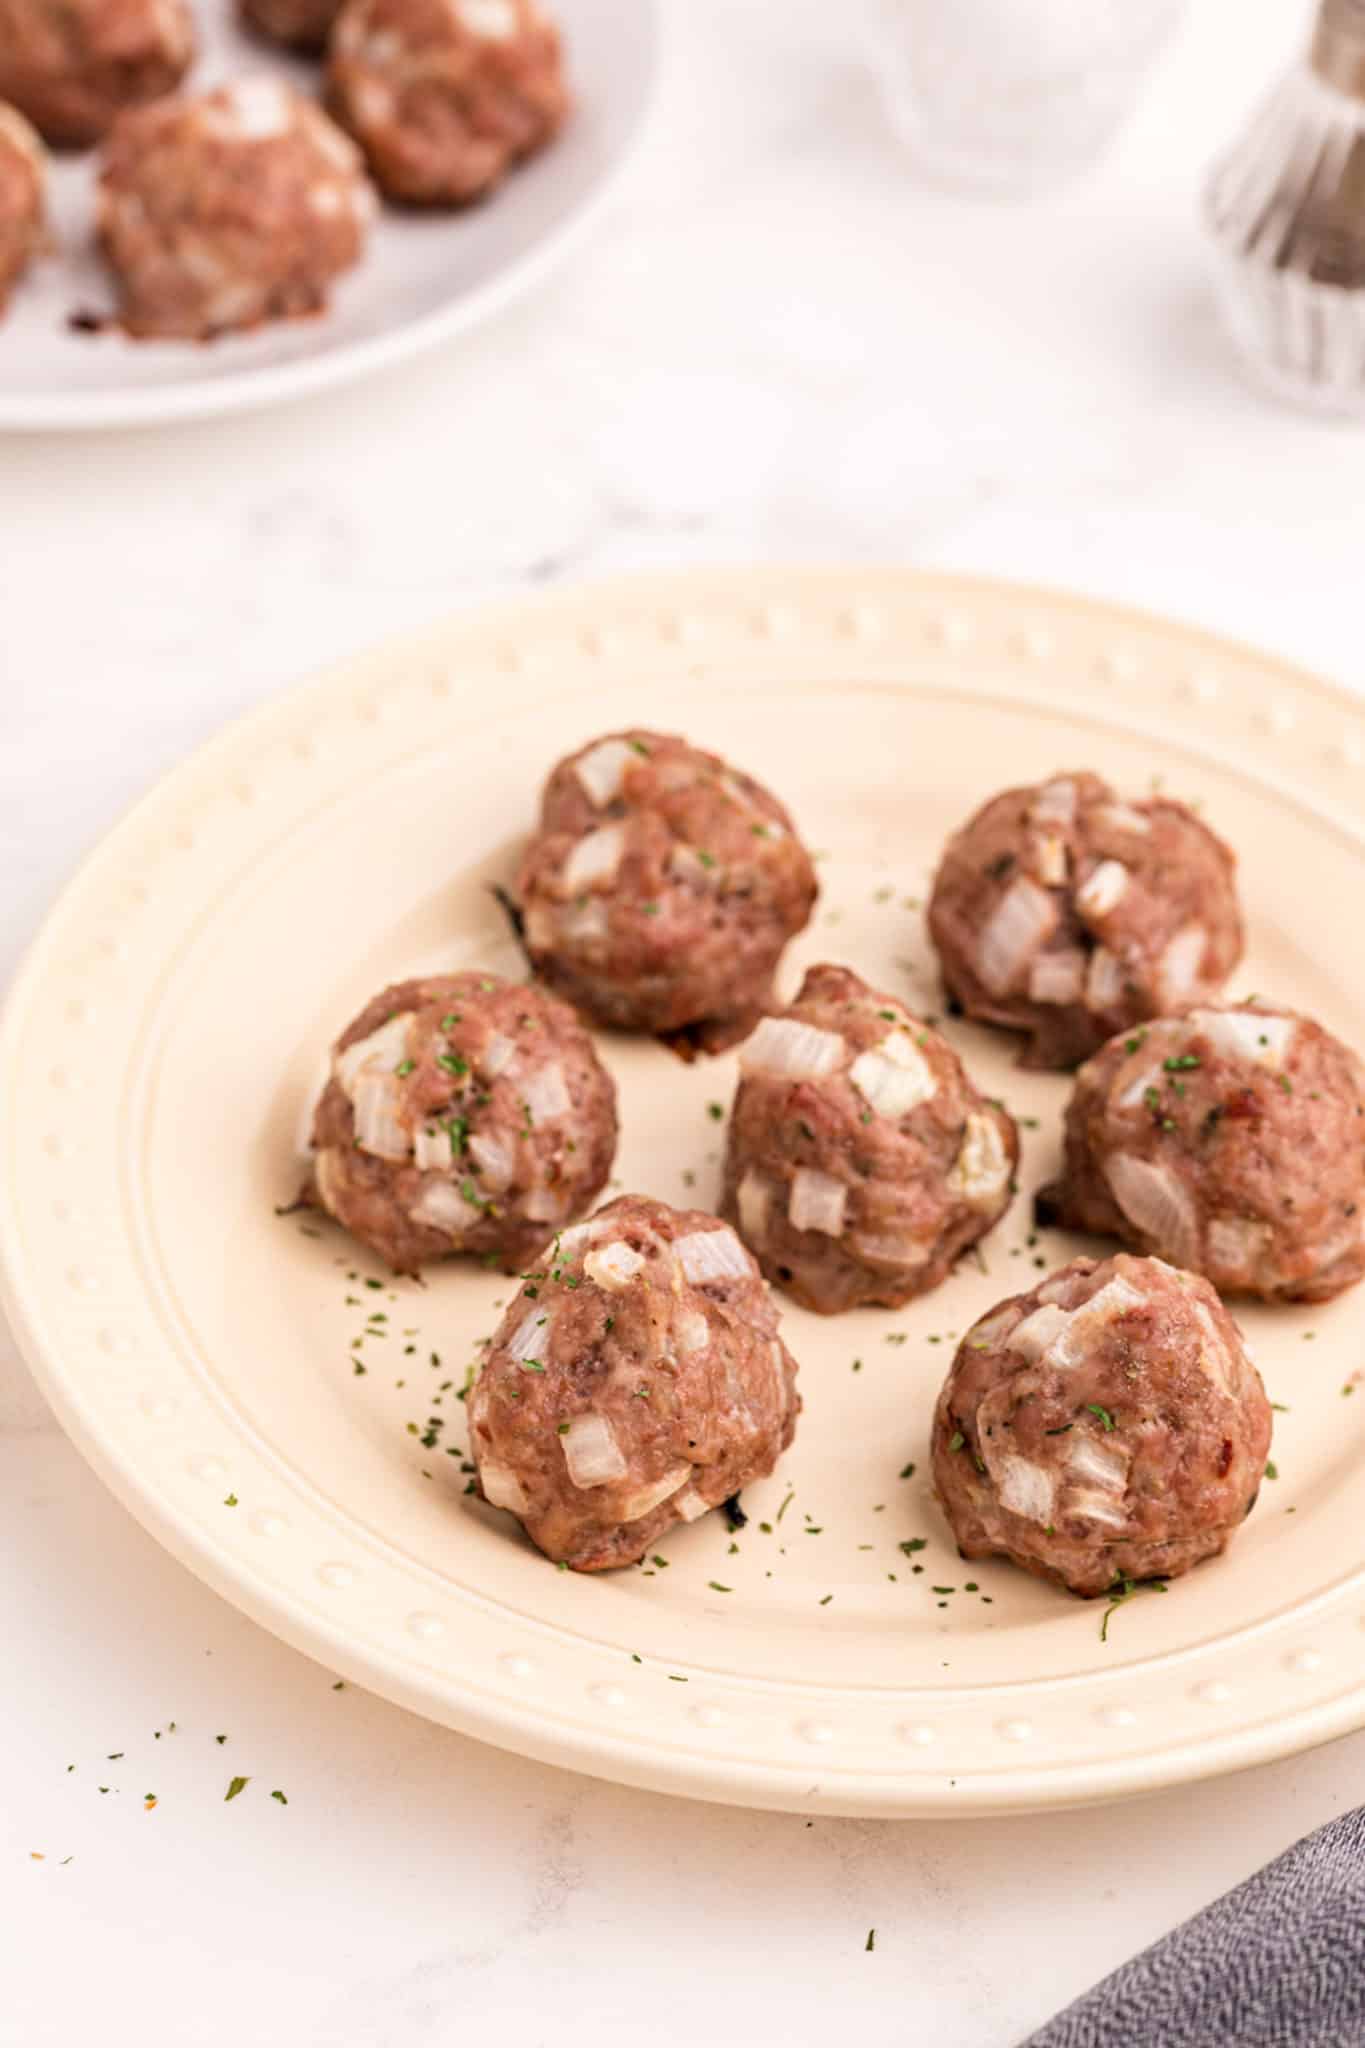 plate of cooked pork meatballs